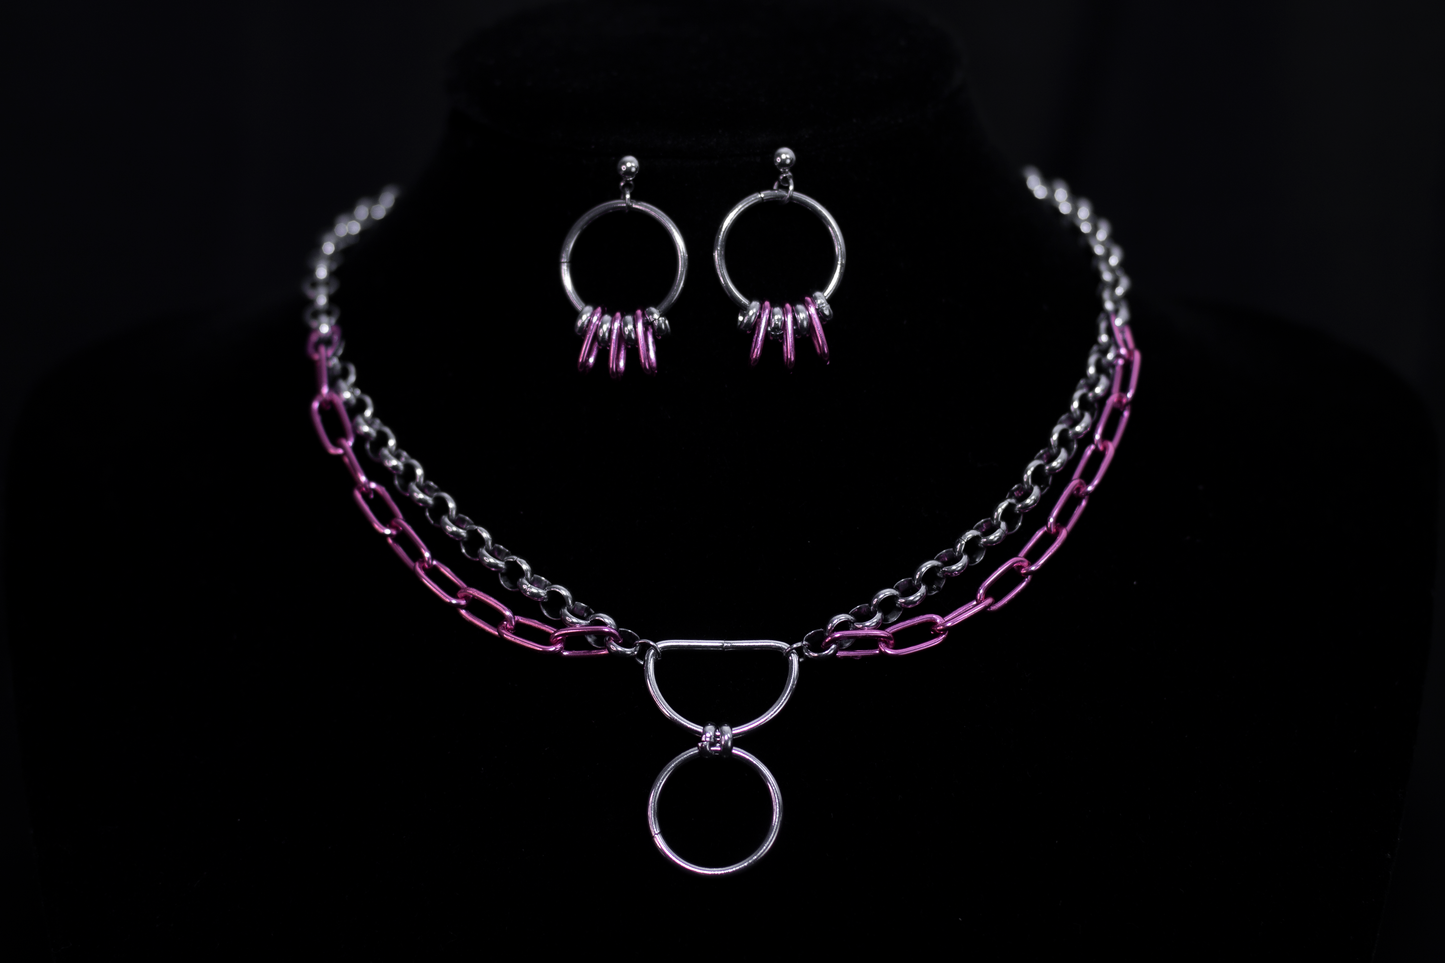 Pink Chain Necklace - FLUO PINK